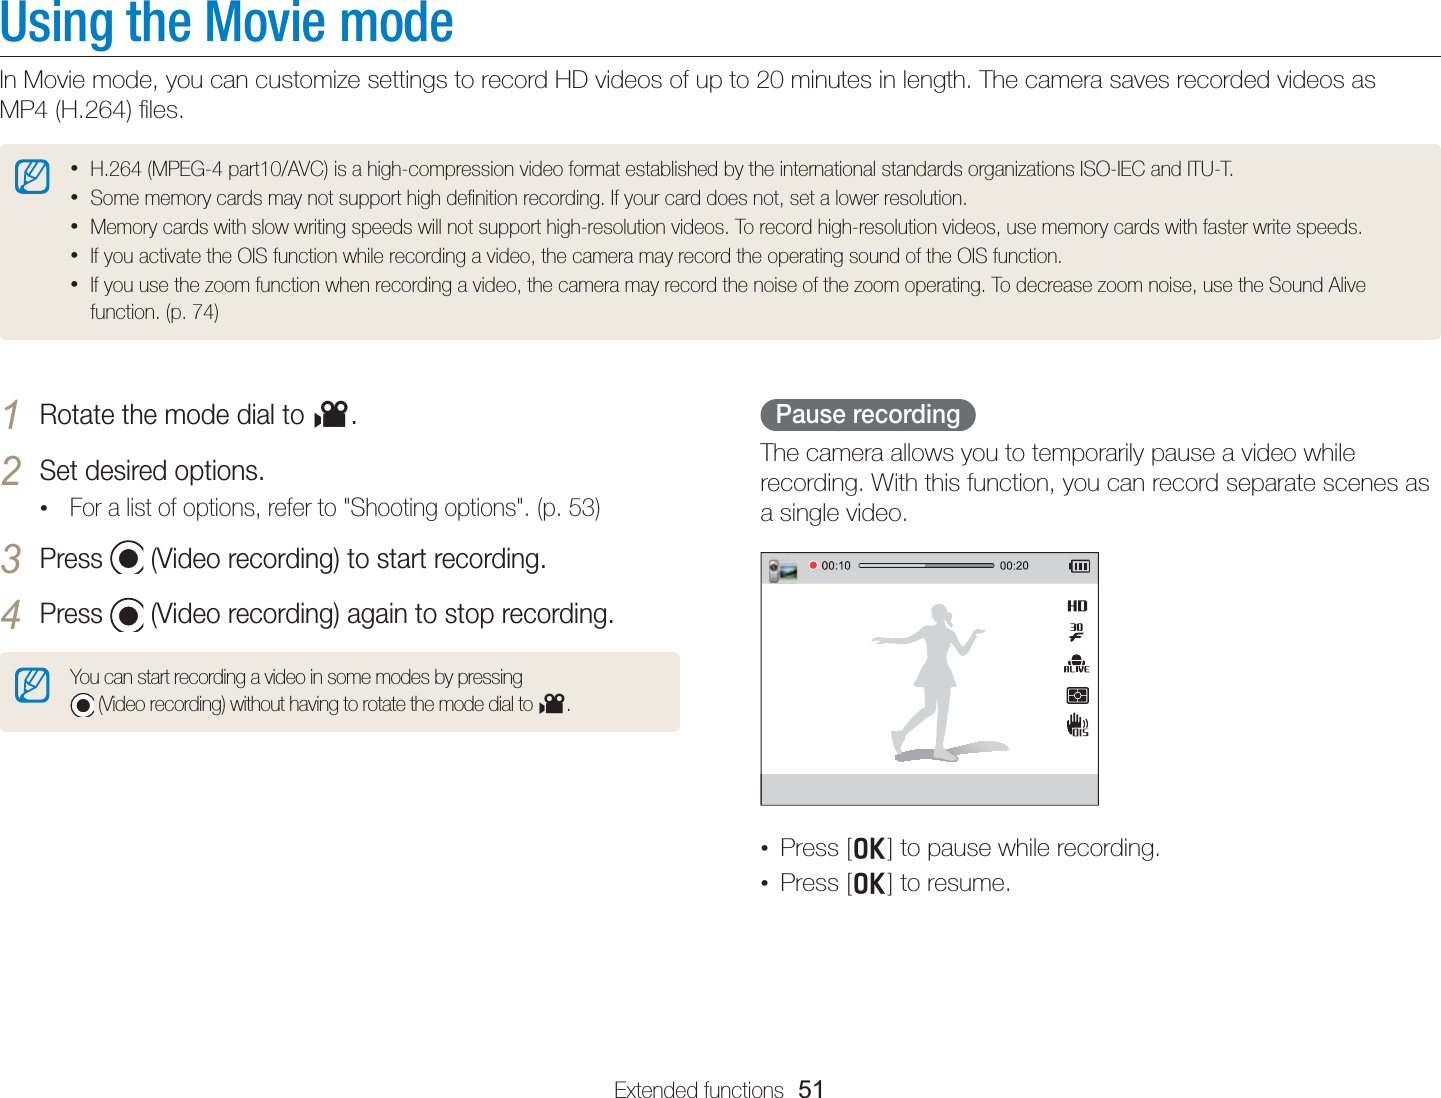 Extended functions  51Using the Movie modeIn Movie mode, you can customize settings to record HD videos of up to 20 minutes in length. The camera saves recorded videos as  MP4 (H.264) ﬁles. • H.264 (MPEG-4 part10/AVC) is a high-compression video format established by the international standards organizations ISO-IEC and ITU-T.• Some memory cards may not support high deﬁnition recording. If your card does not, set a lower resolution.• Memory cards with slow writing speeds will not support high-resolution videos. To record high-resolution videos, use memory cards with faster write speeds.• If you activate the OIS function while recording a video, the camera may record the operating sound of the OIS function.• If you use the zoom function when recording a video, the camera may record the noise of the zoom operating. To decrease zoom noise, use the Sound Alive function. (p. 74)Pause recordingThe camera allows you to temporarily pause a video while recording. With this function, you can record separate scenes as a single video.•  Press [o] to pause while recording.•  Press [o] to resume.1 Rotate the mode dial to v.2 Set desired options. • For a list of options, refer to &quot;Shooting options&quot;. (p. 53)3 Press   (Video recording) to start recording.4 Press   (Video recording) again to stop recording.You can start recording a video in some modes by pressing   (Video recording) without having to rotate the mode dial to v.